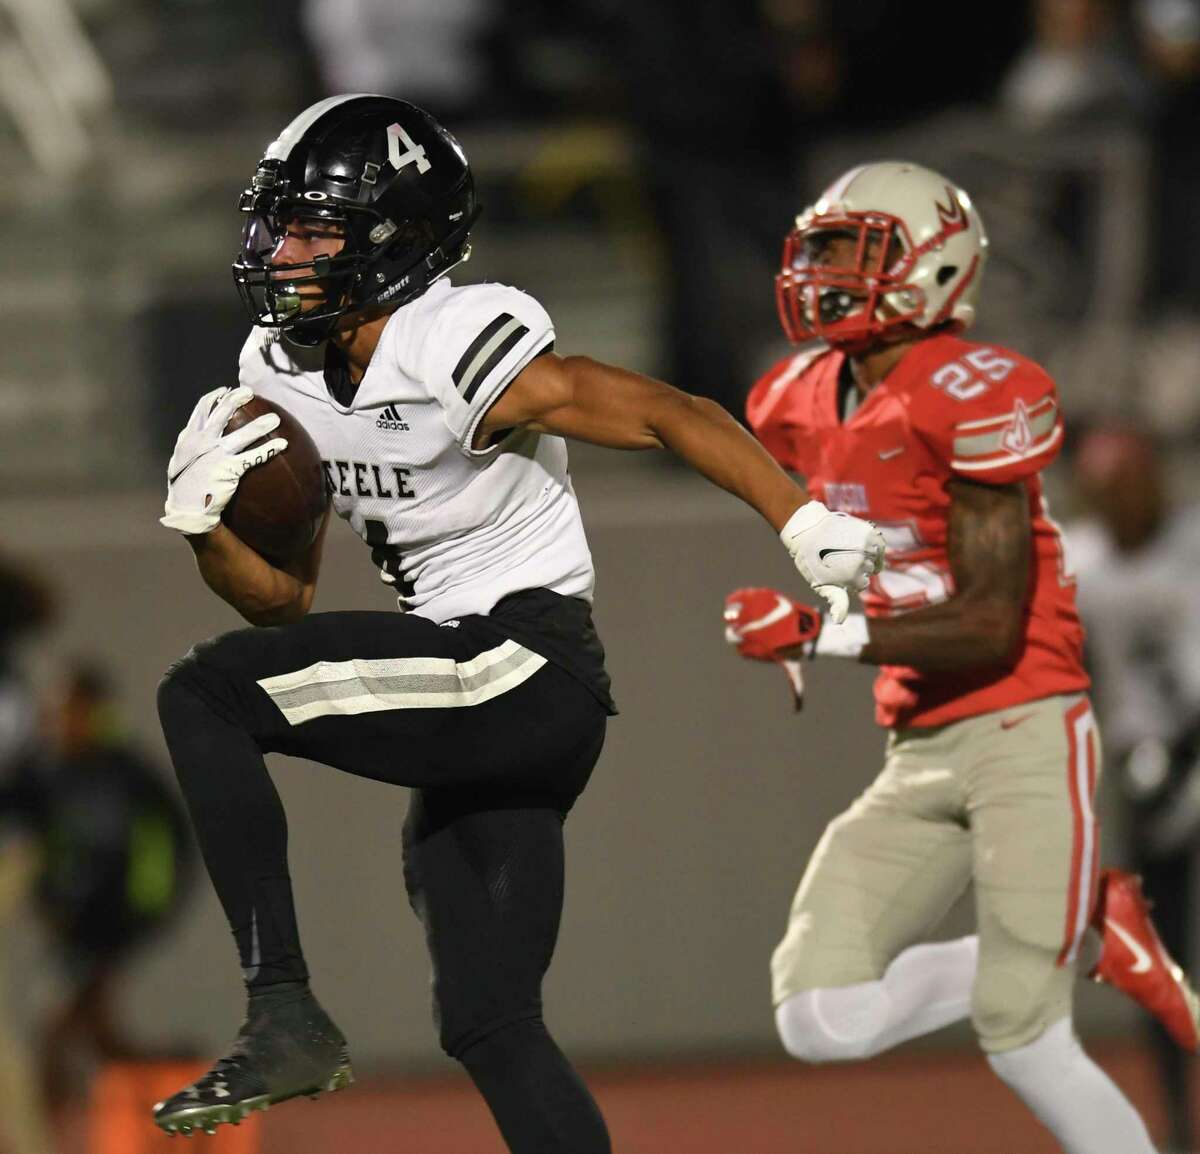 Steele's Teshaun Singleton runs for a touchdown as Dantrelle Eggleston (25) of Judson chases during high school football action in Converse on Friday, Oct. 29, 2021. Steele won, 35-30.